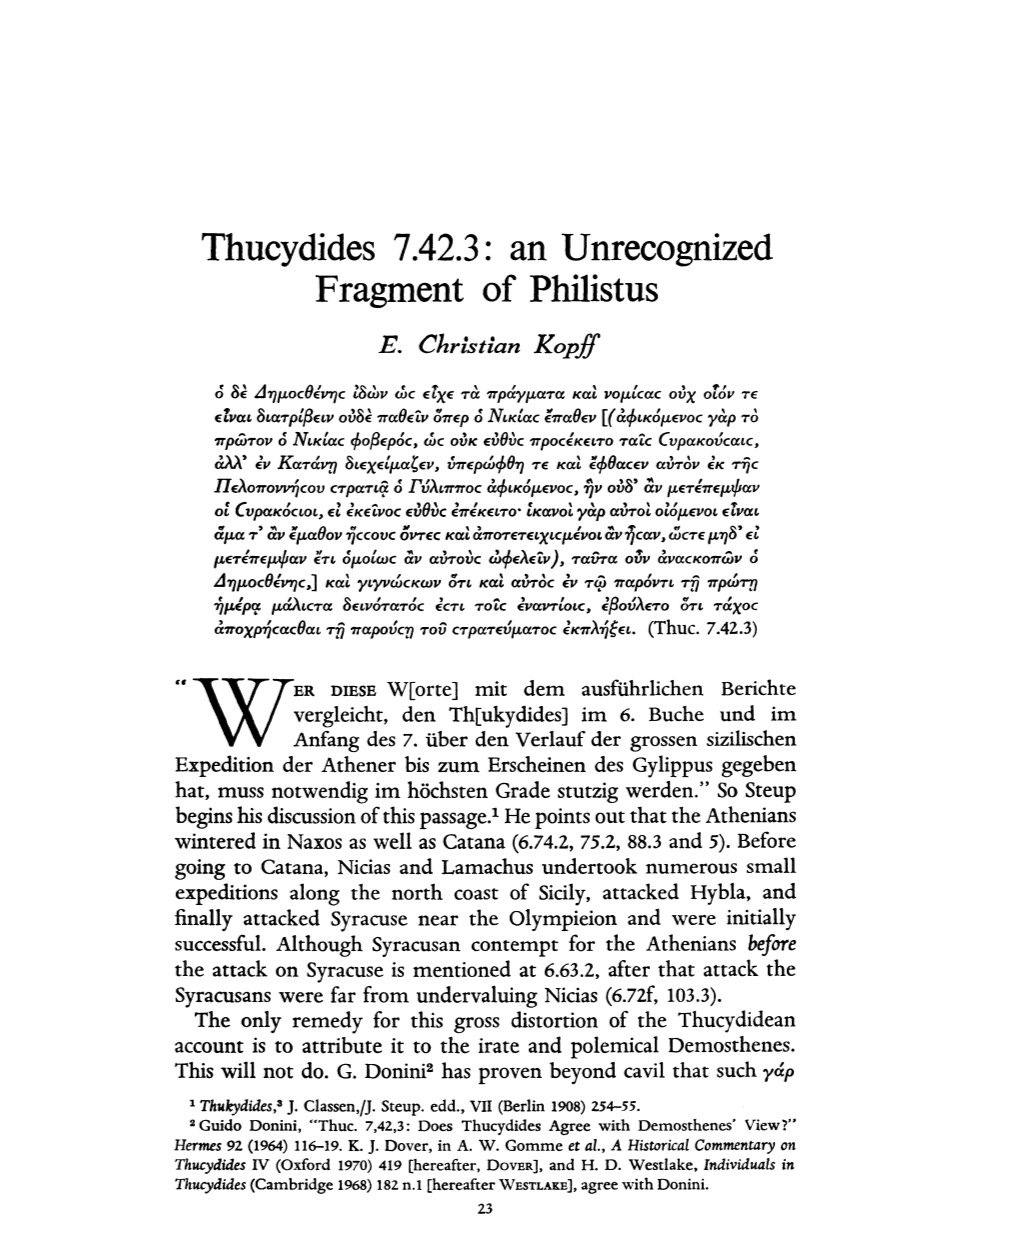 Thucydides 7.42.3: an Unrecognized Fragment of Philistus